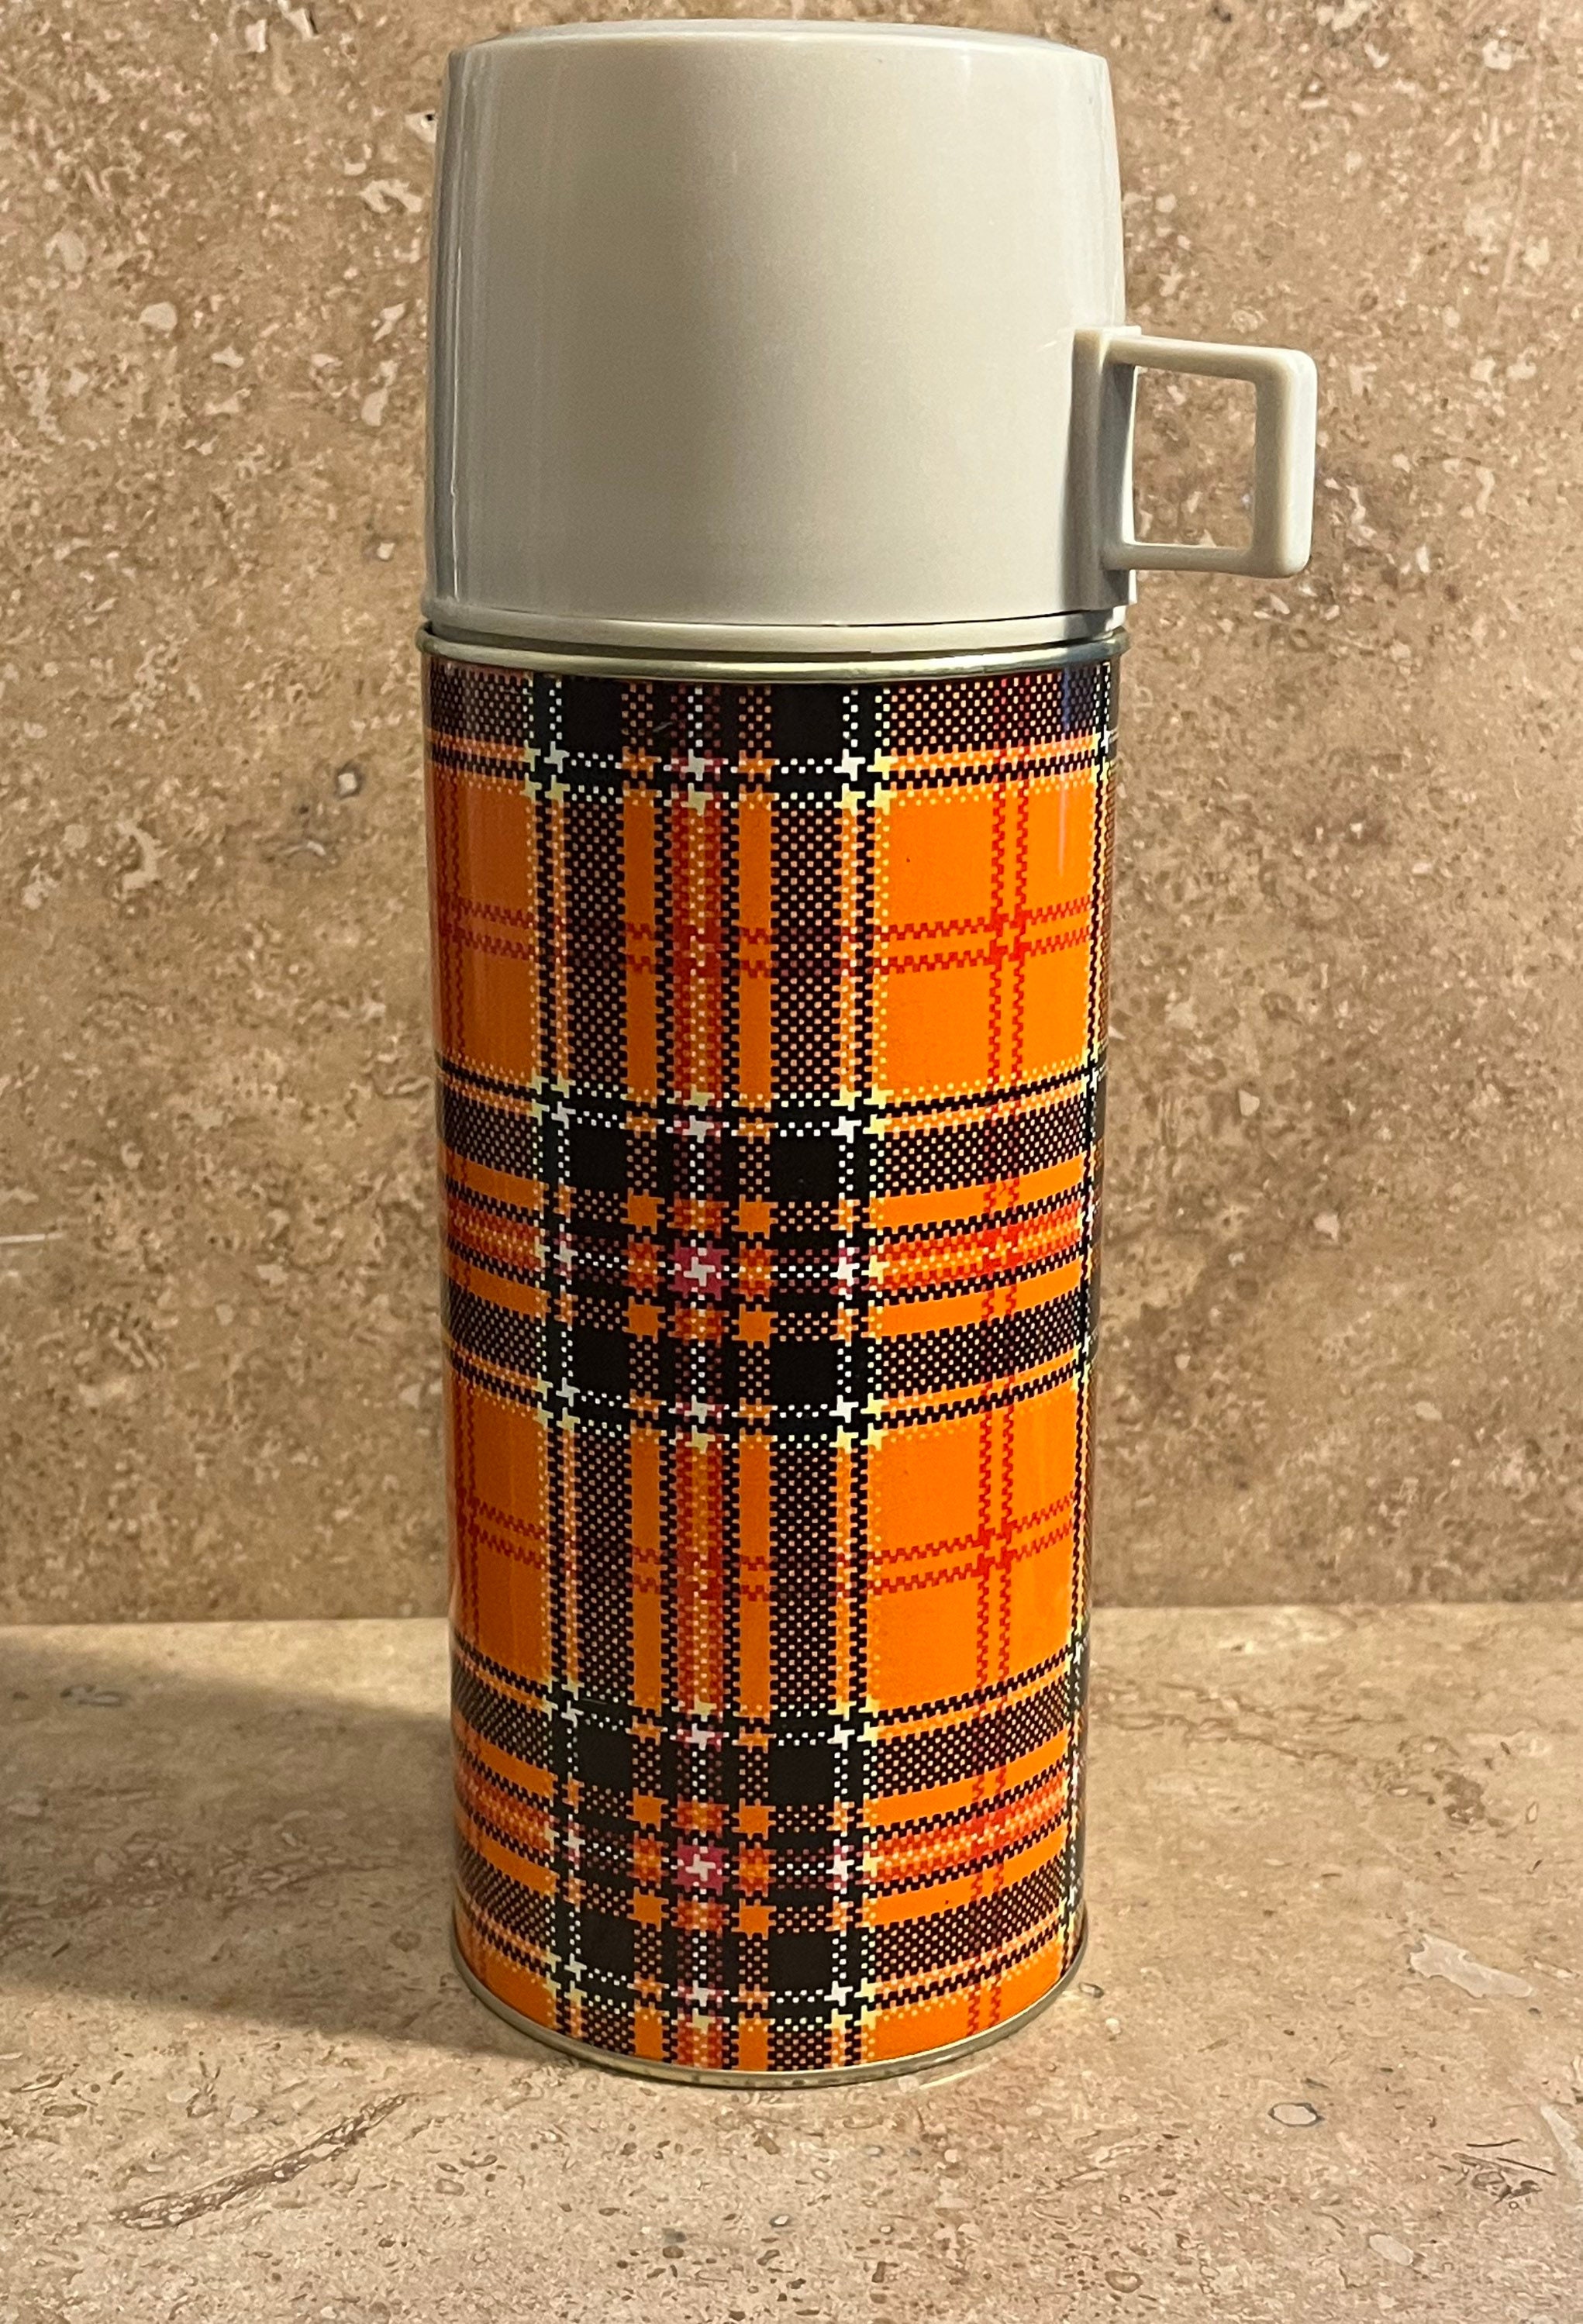 Vintage Thermos An Old Retro Plaid Thermos In The Hands Of A Child